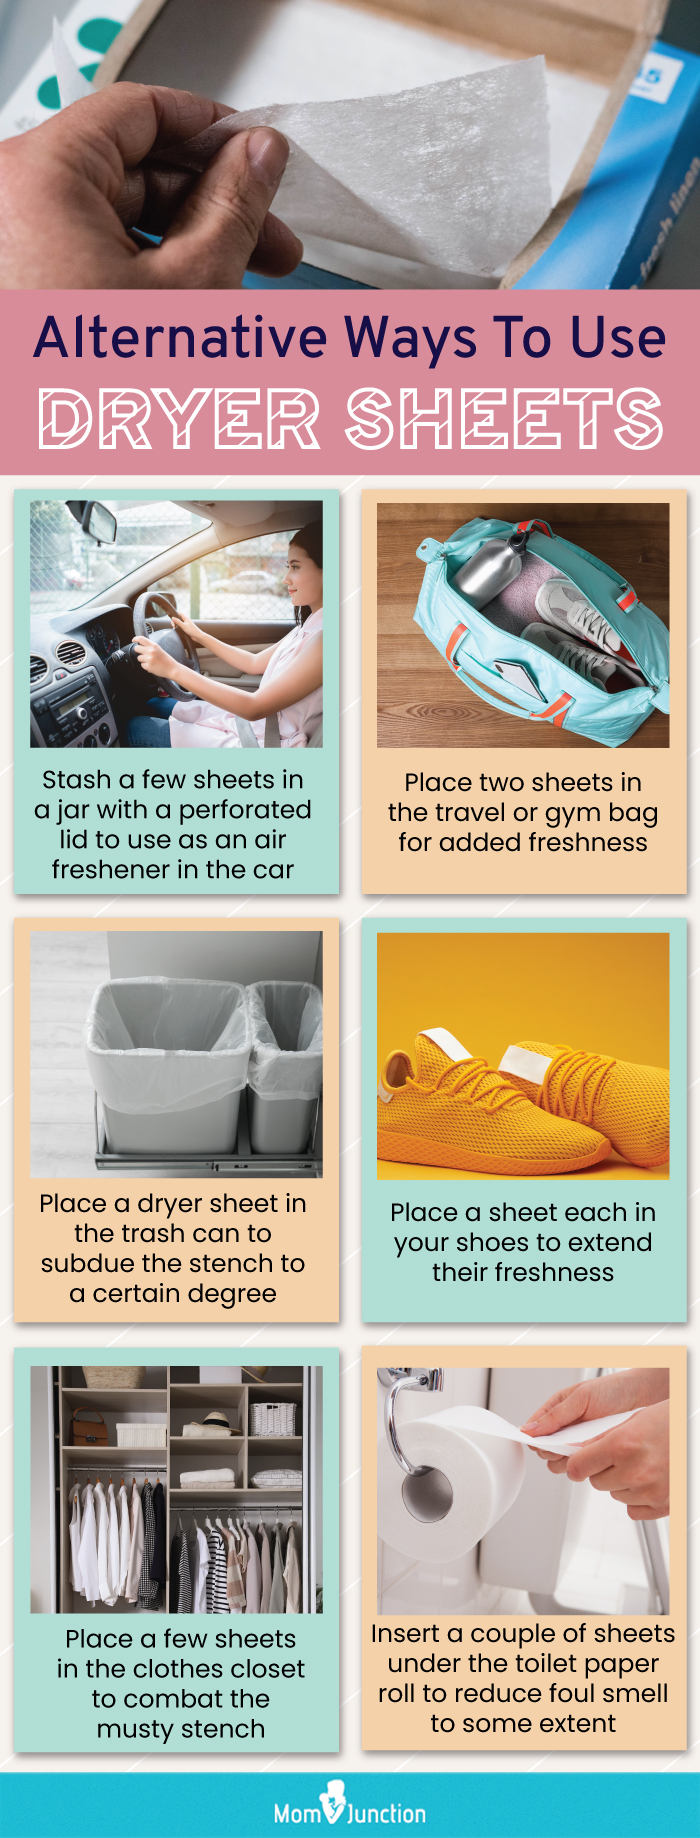 Alternative Ways To Use Dryer Sheets (Infographic)